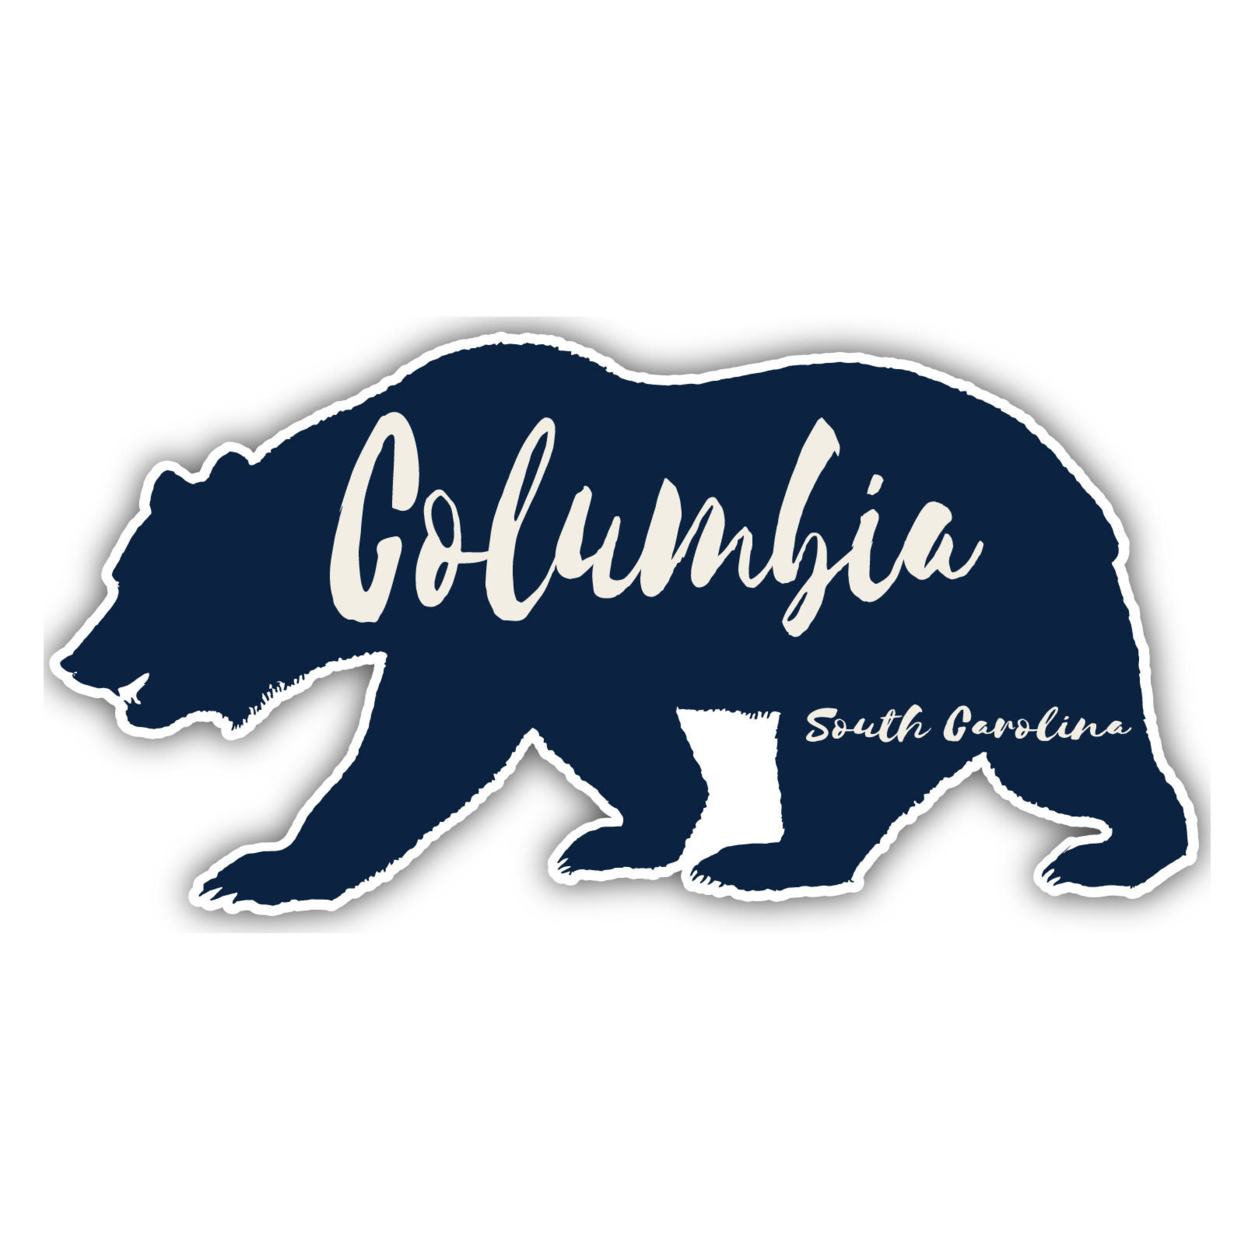 Columbia South Carolina Souvenir Decorative Stickers (Choose Theme And Size) - 4-Pack, 10-Inch, Bear